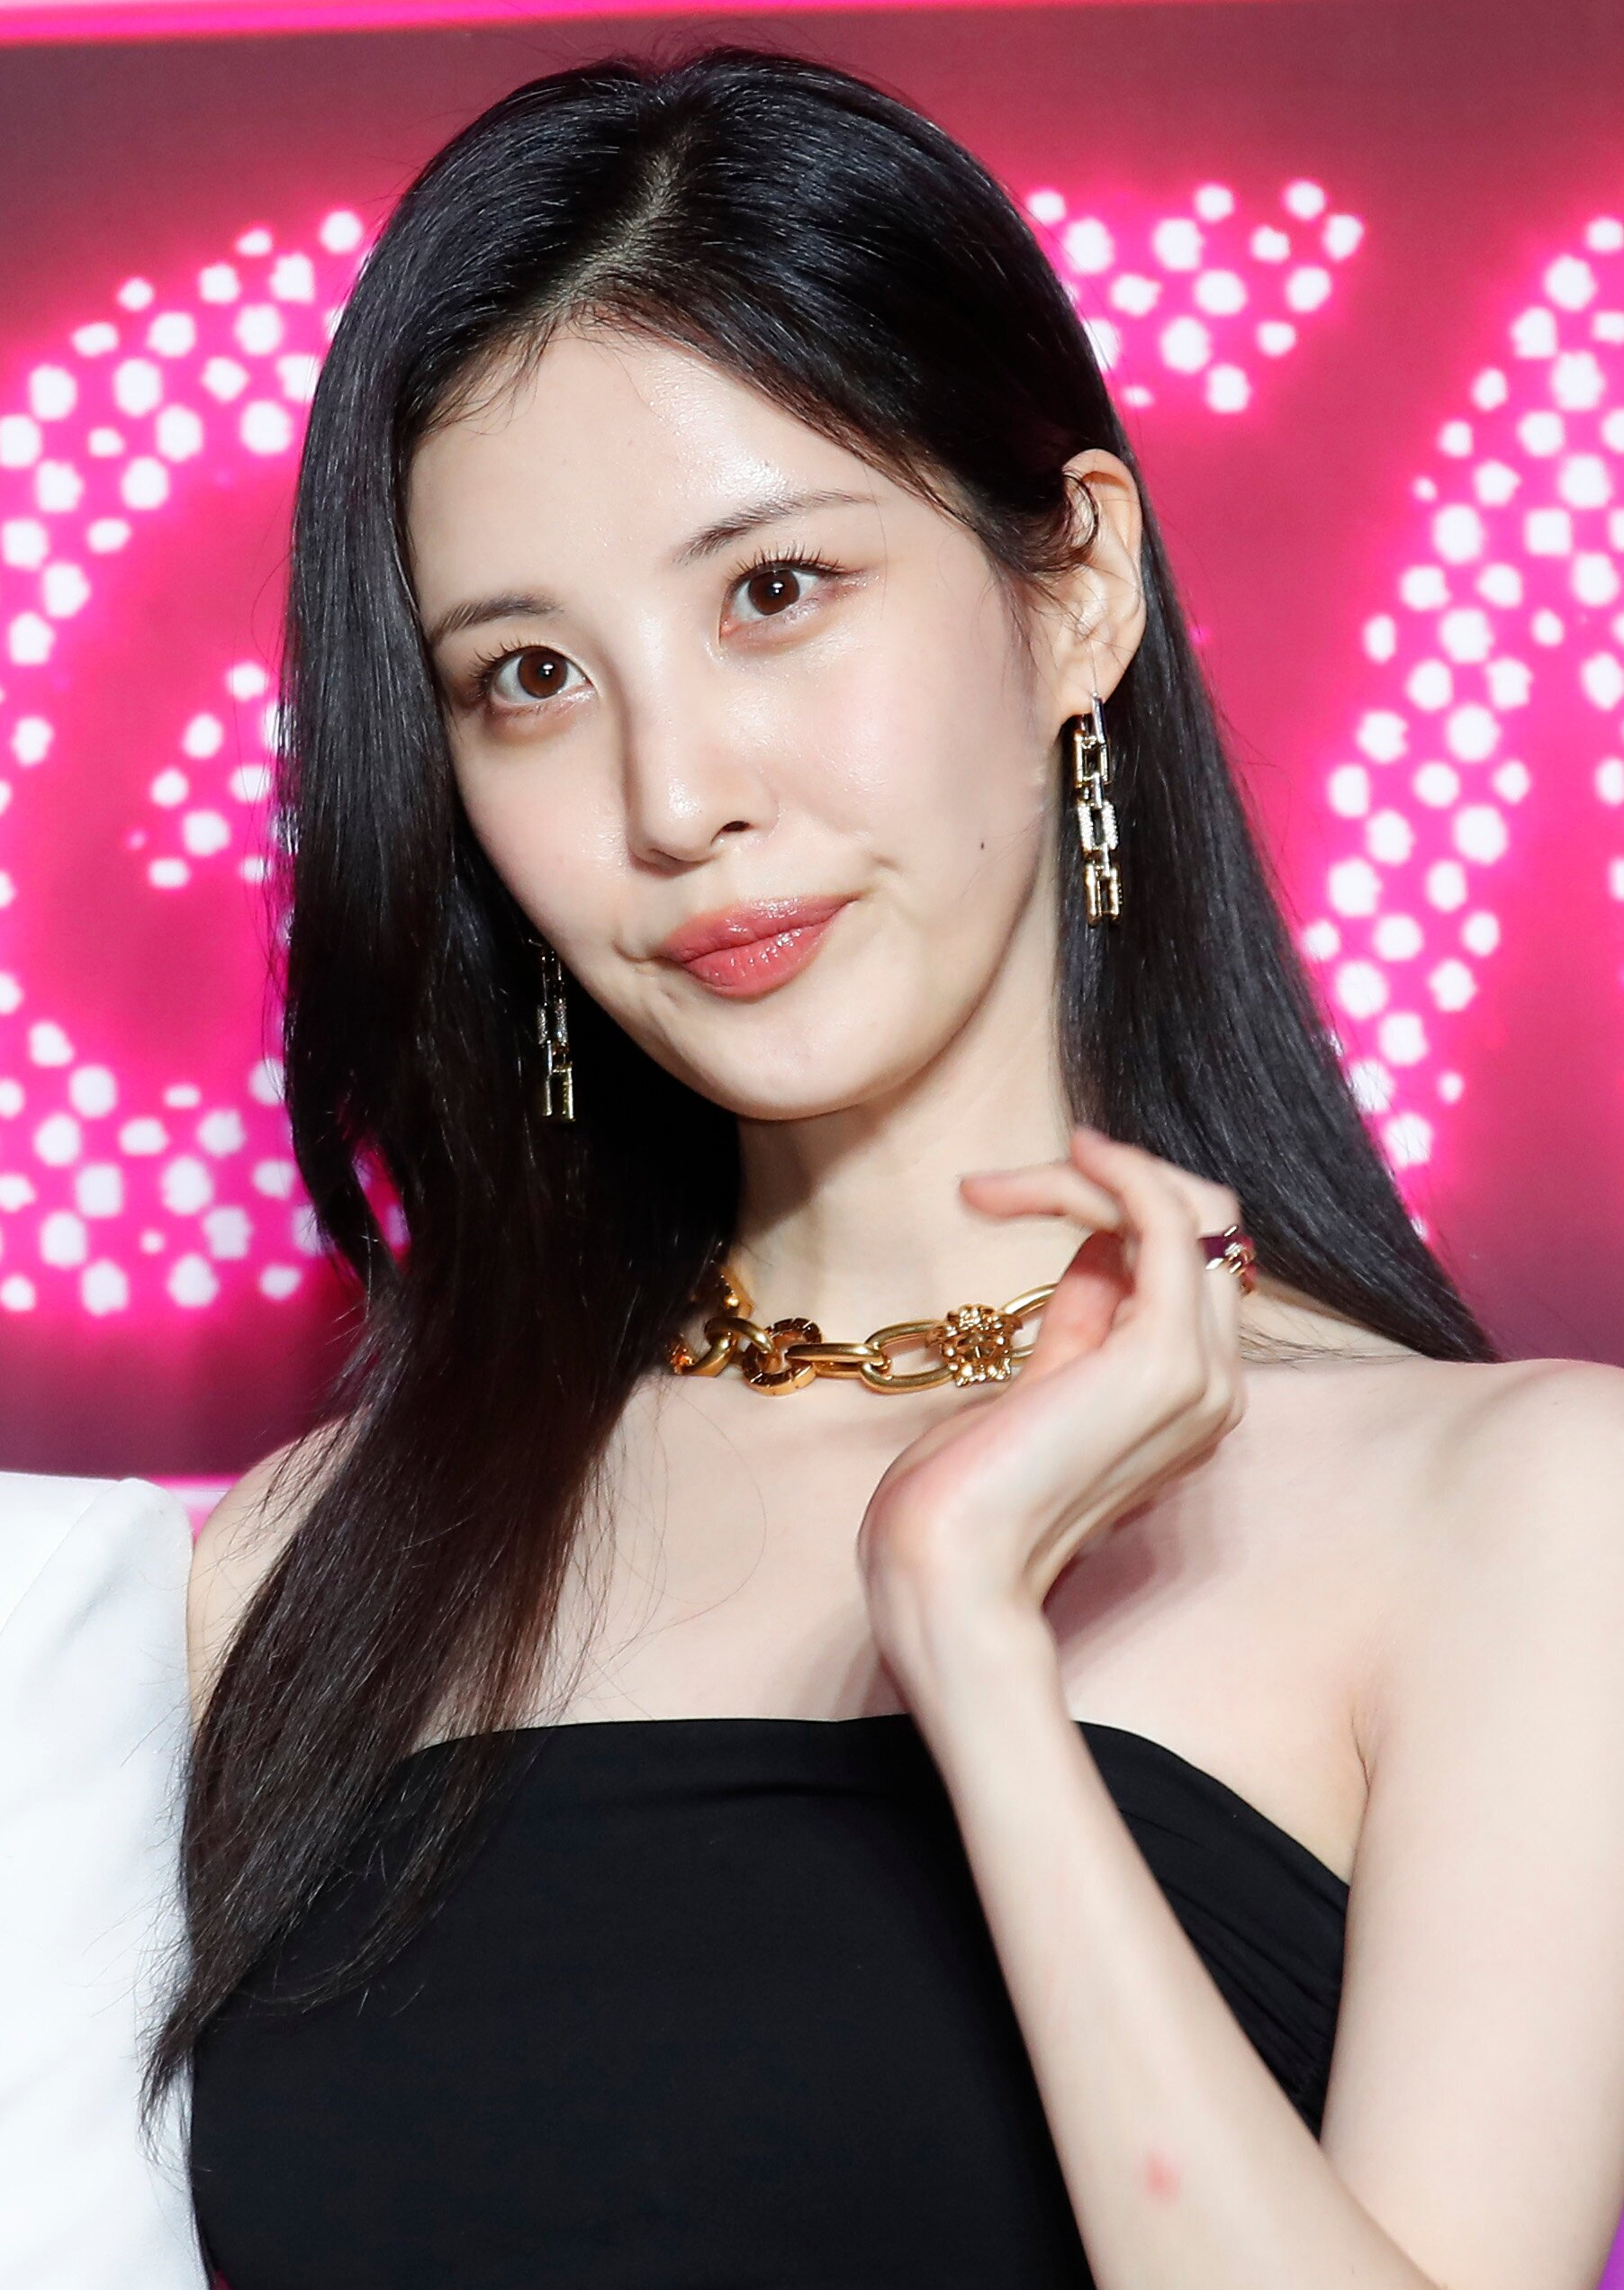 1804x2544 August 5, 2022 SNSD Seohyun 'FOREVER 1' Press Showcase | Kpopping